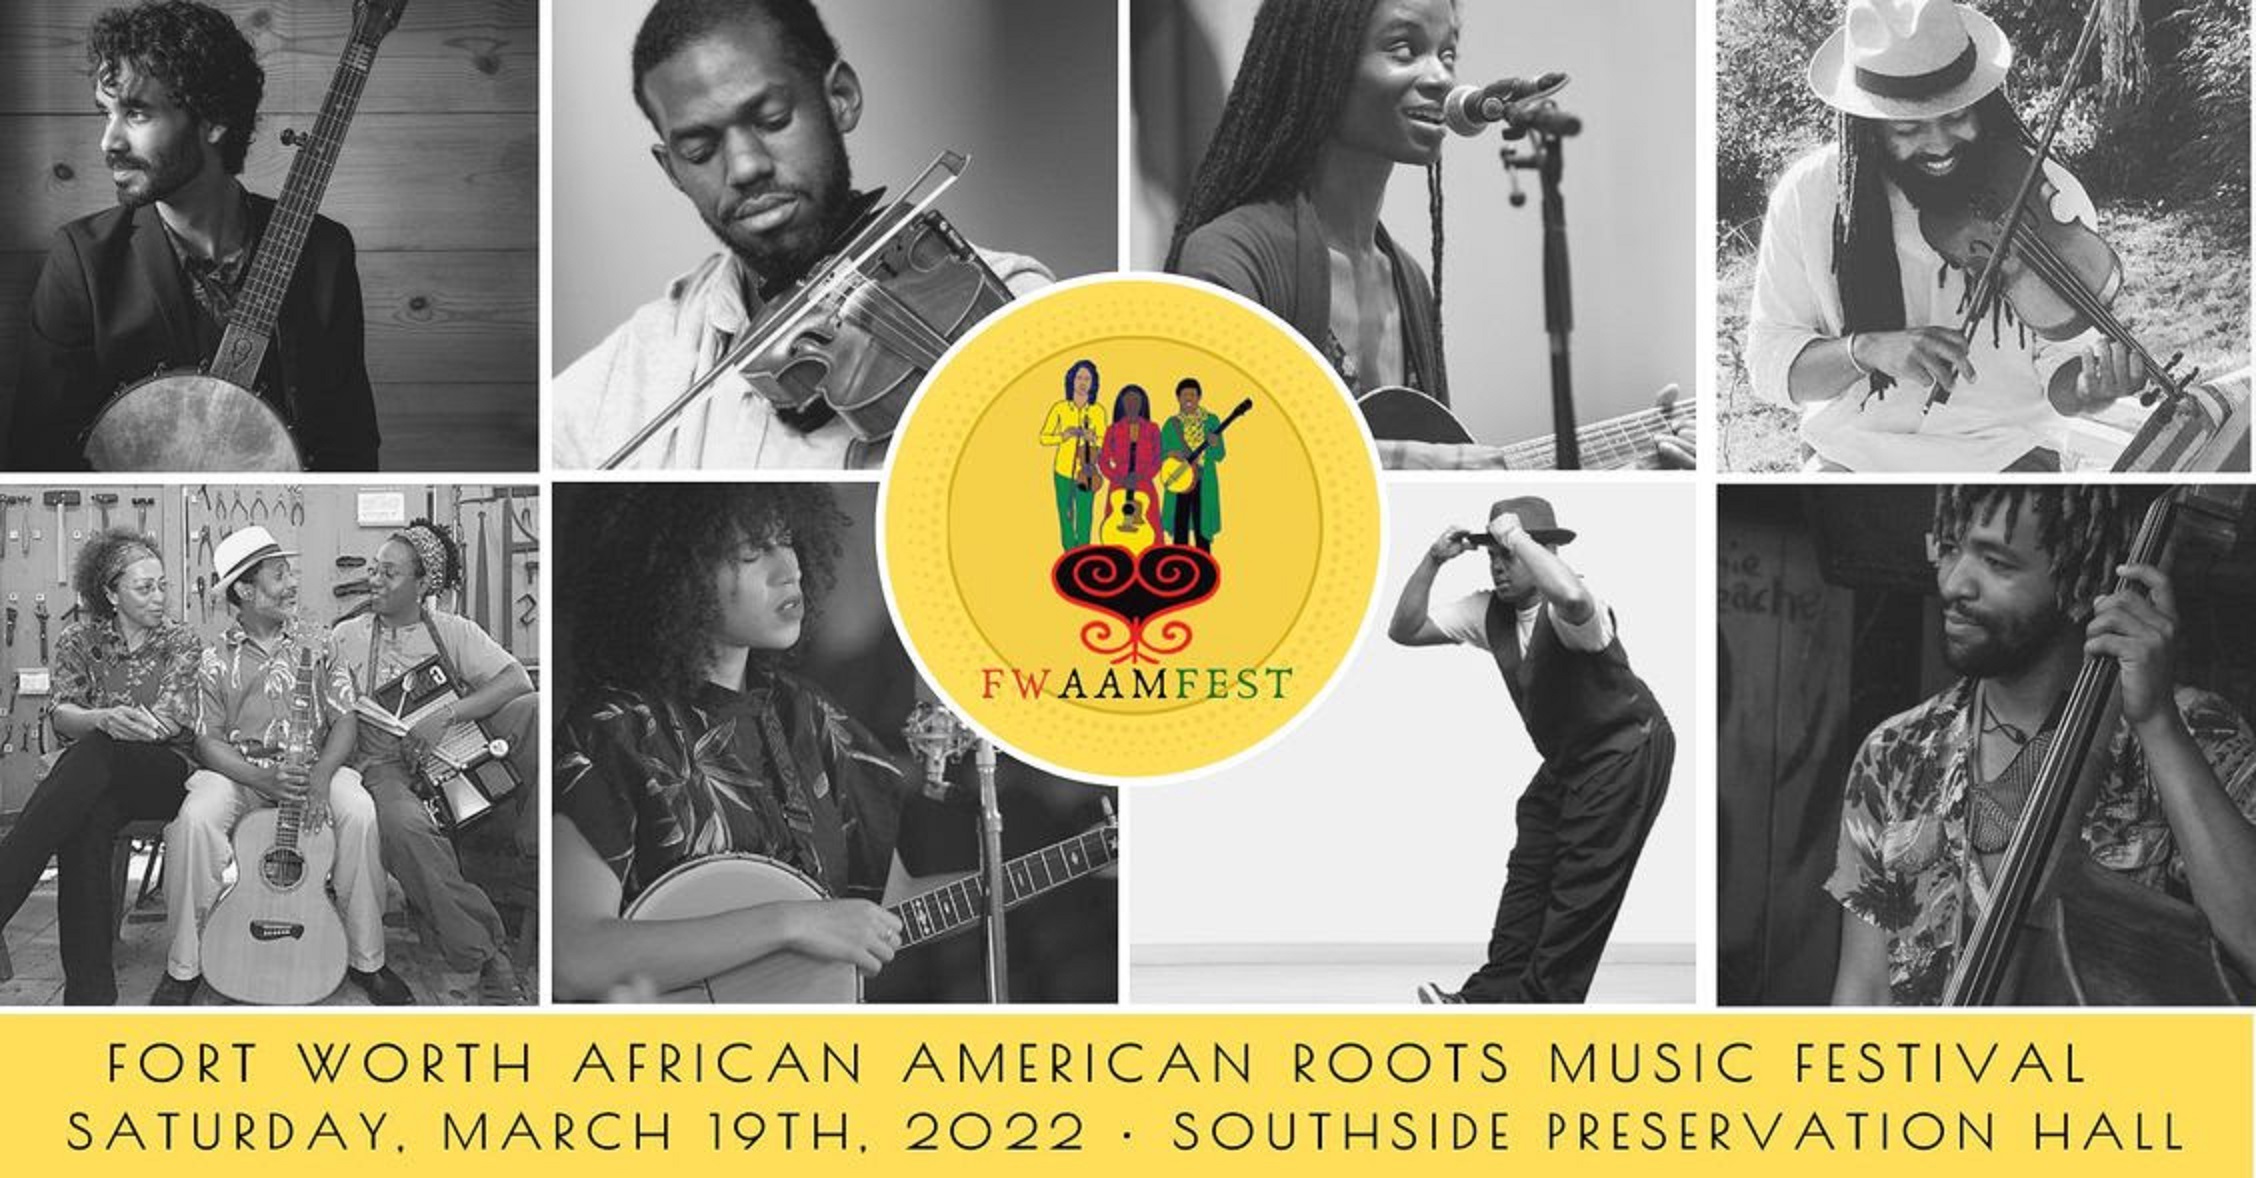 Fort Worth African American Roots Music Festival - March 19, 2022